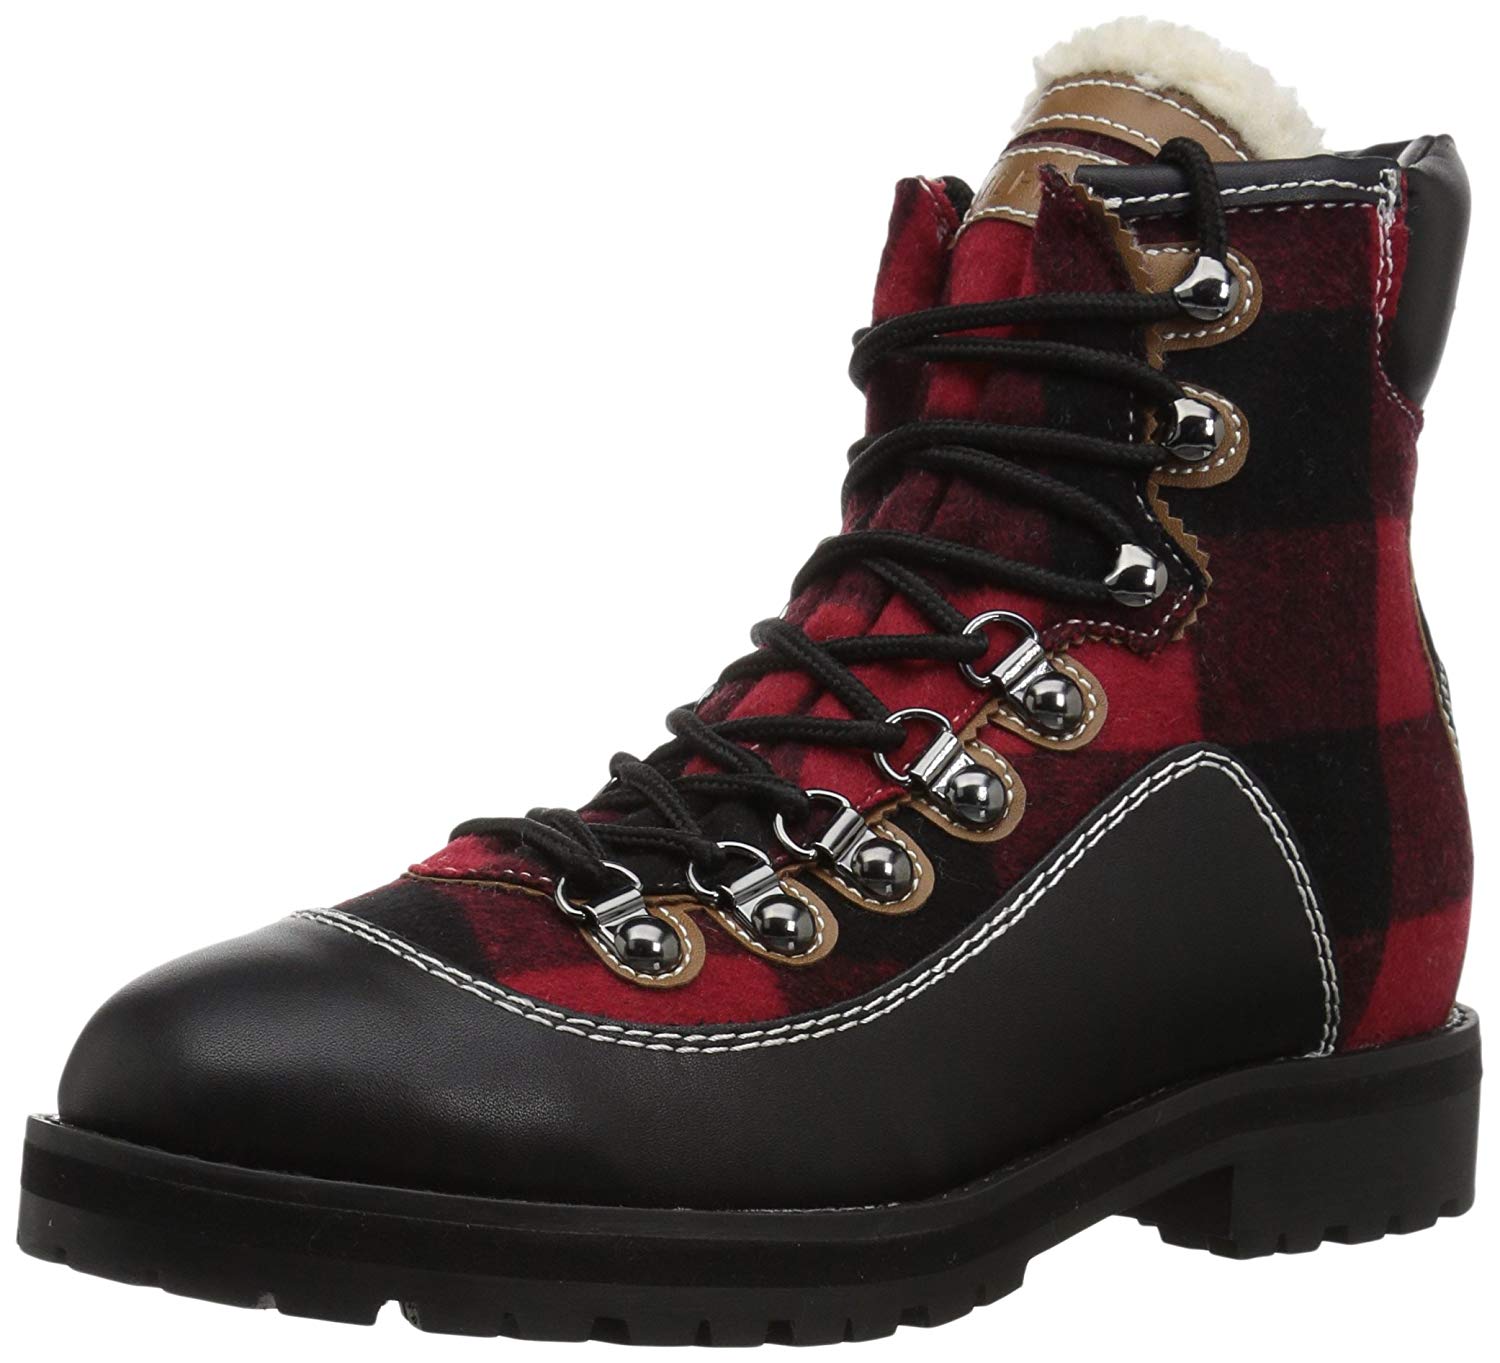 UPC 191514611827 product image for Tommy Hilfiger Women's Tonny Hiking Boot, Red Plaid, Size 7.0 | upcitemdb.com